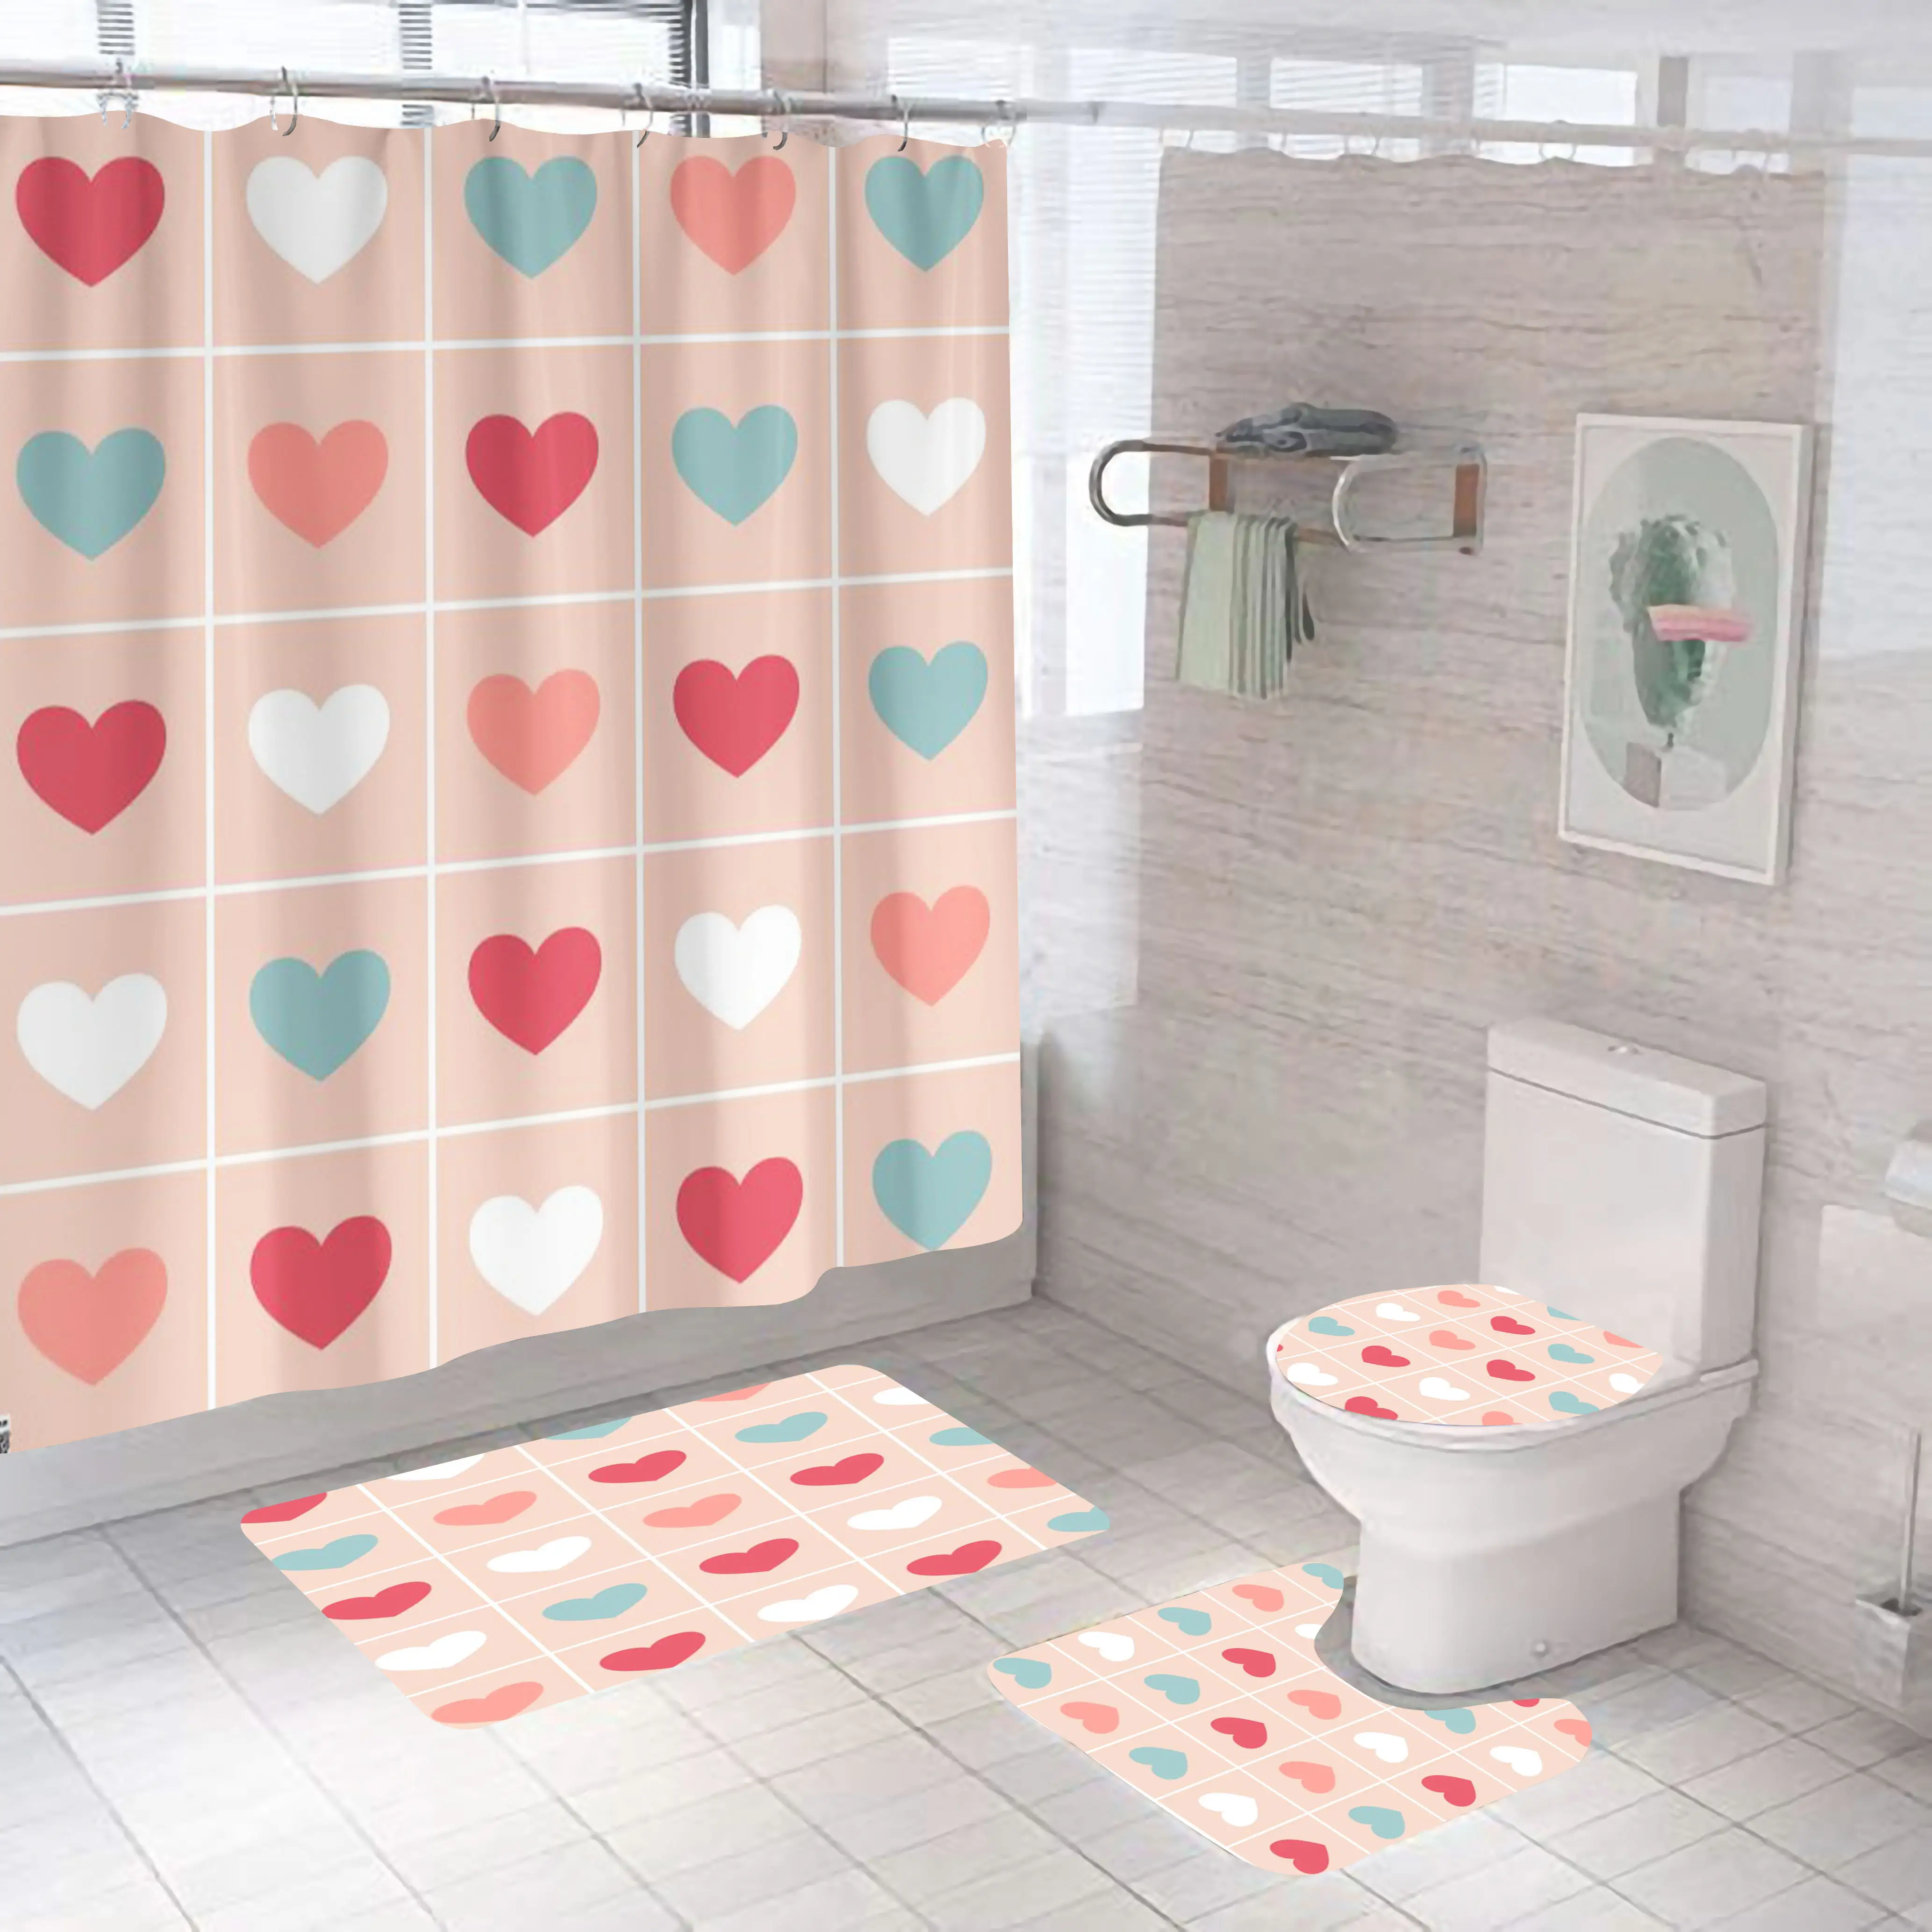 Love is love color Cute Patterns Picture 100% Polyester Waterproof Bathroom Bath Set Shower Curtain And Rug Set